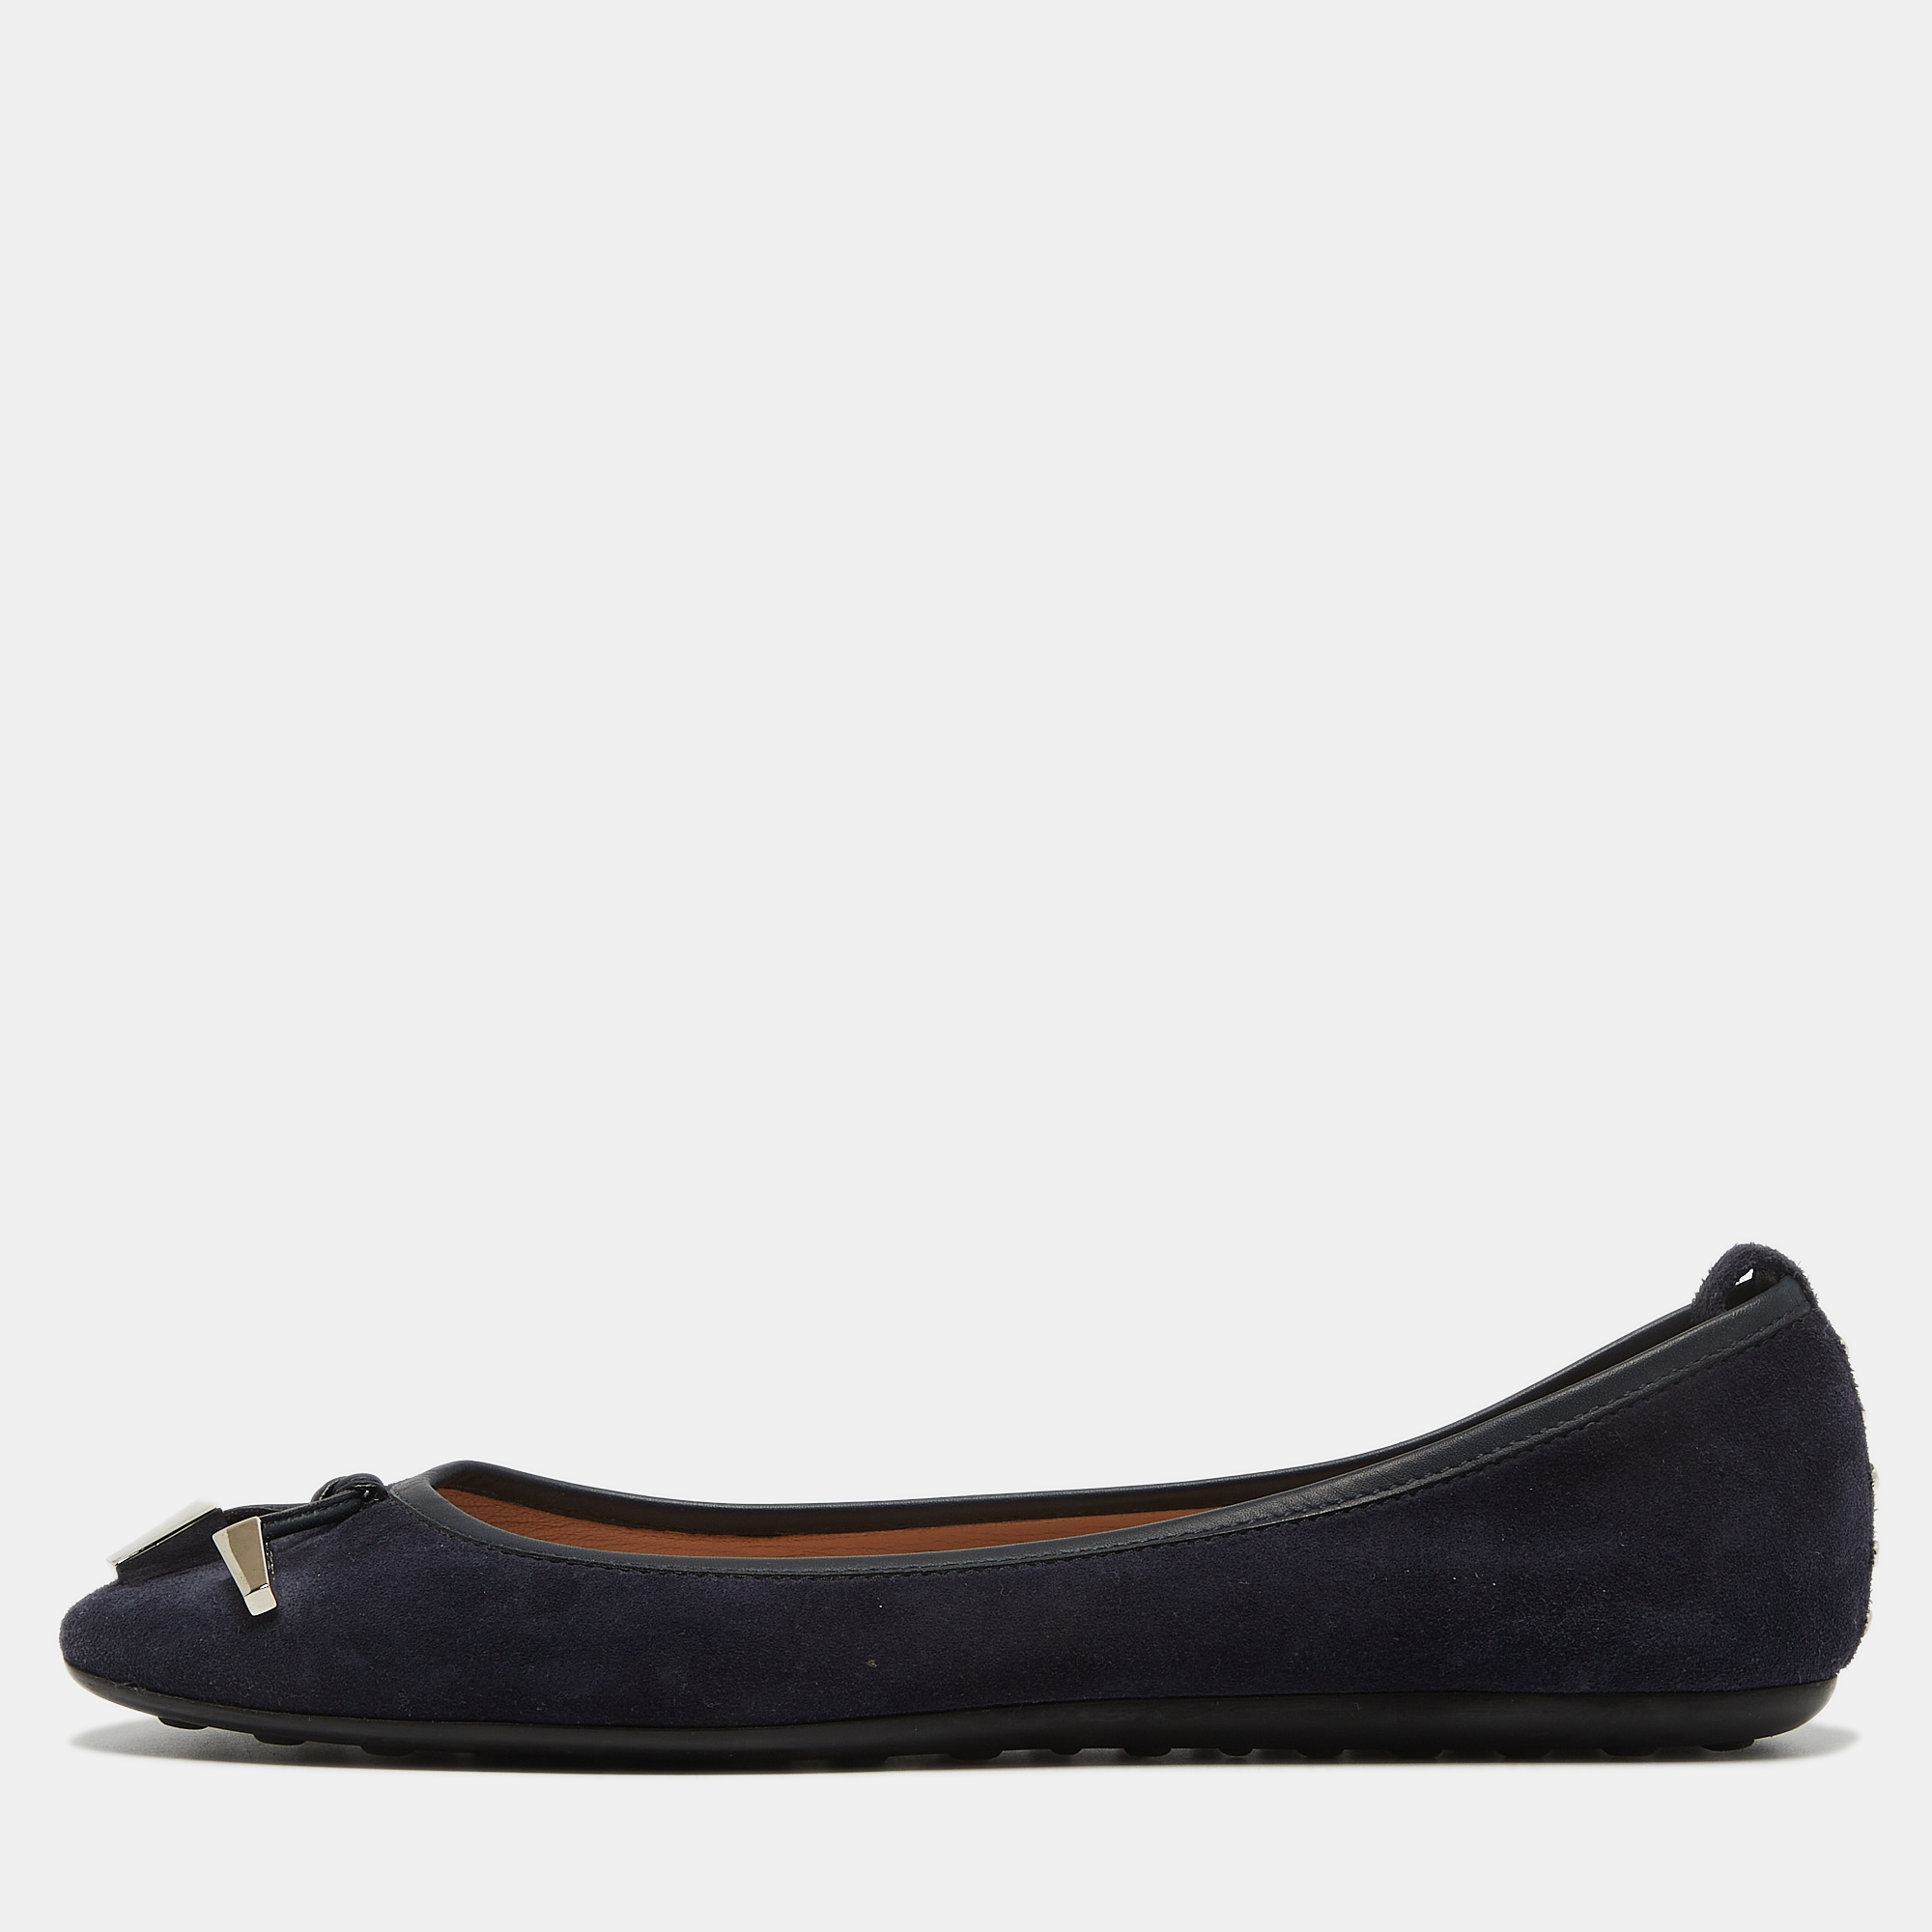 Pre-owned Tod's Navy Blue Suede Studded Ballet Flats Size 37.5